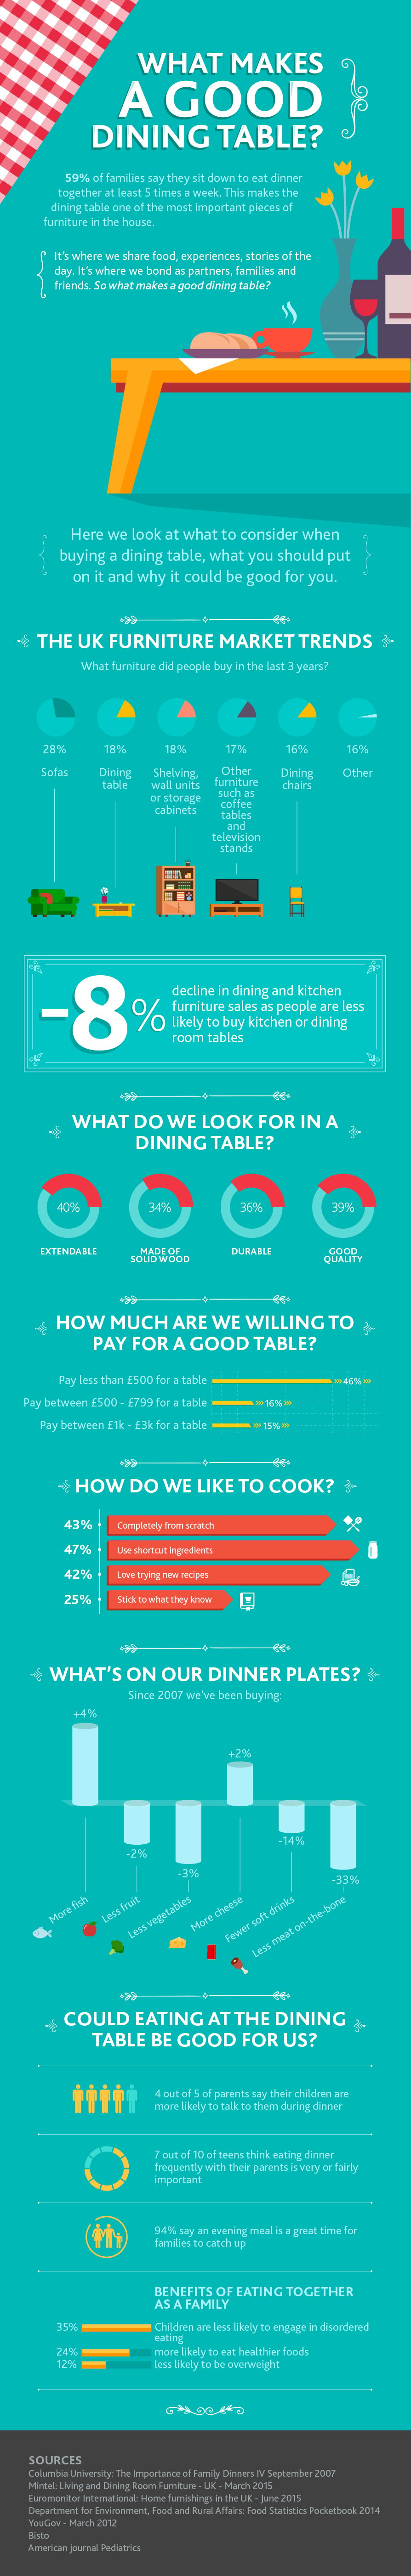 OKA - What makes a good dining table - FINAL - 30.10.2015 (1)